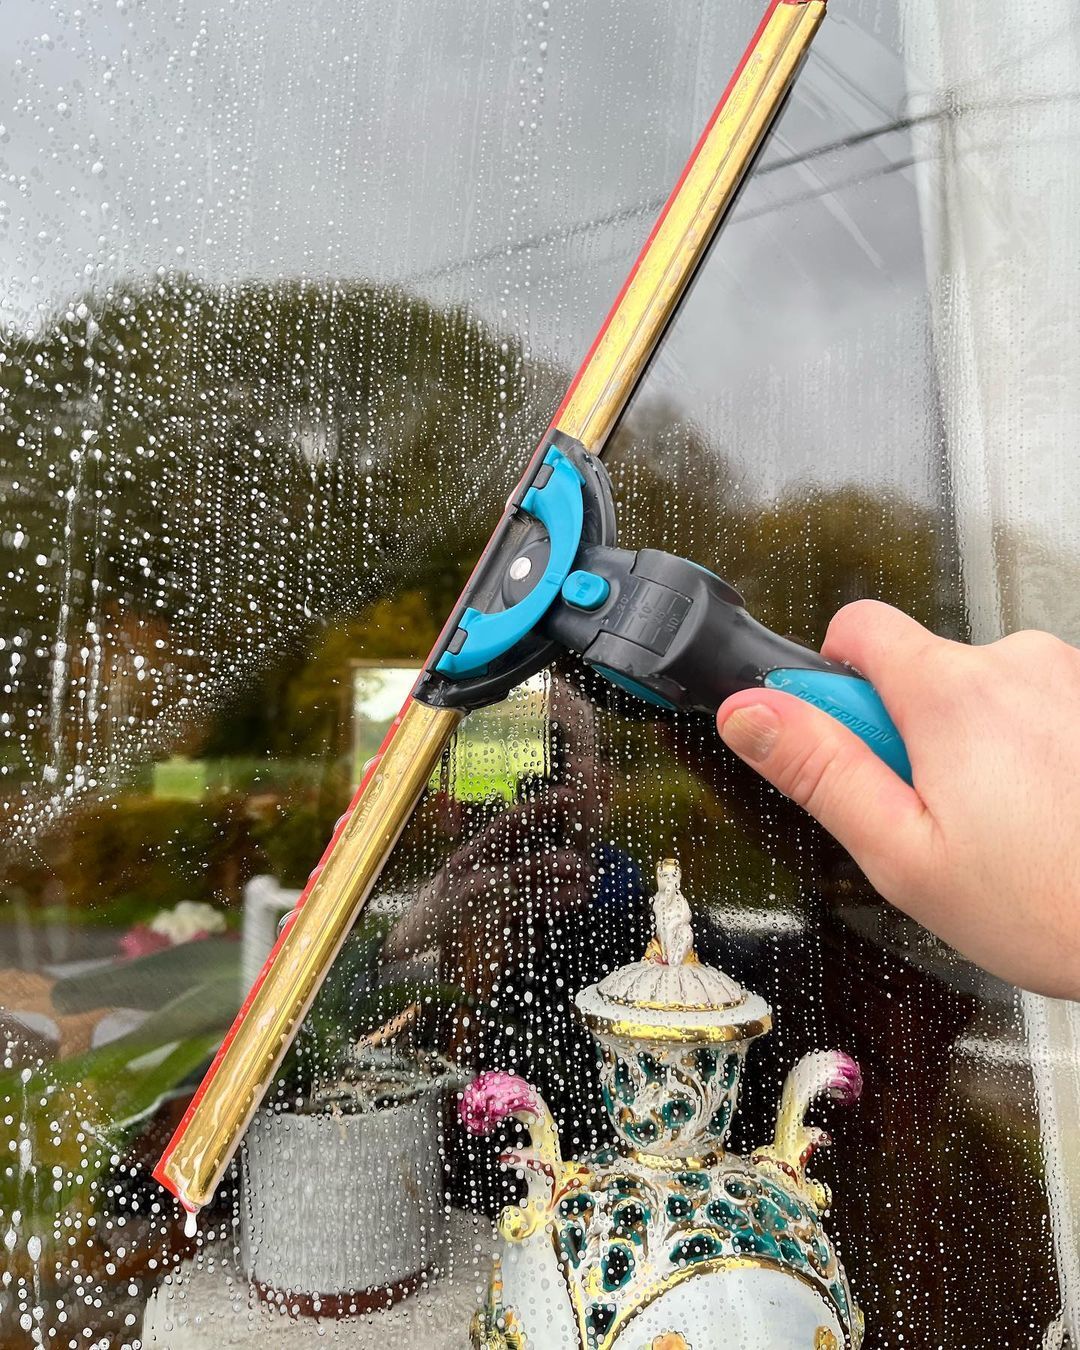 S technique with squeegee on window